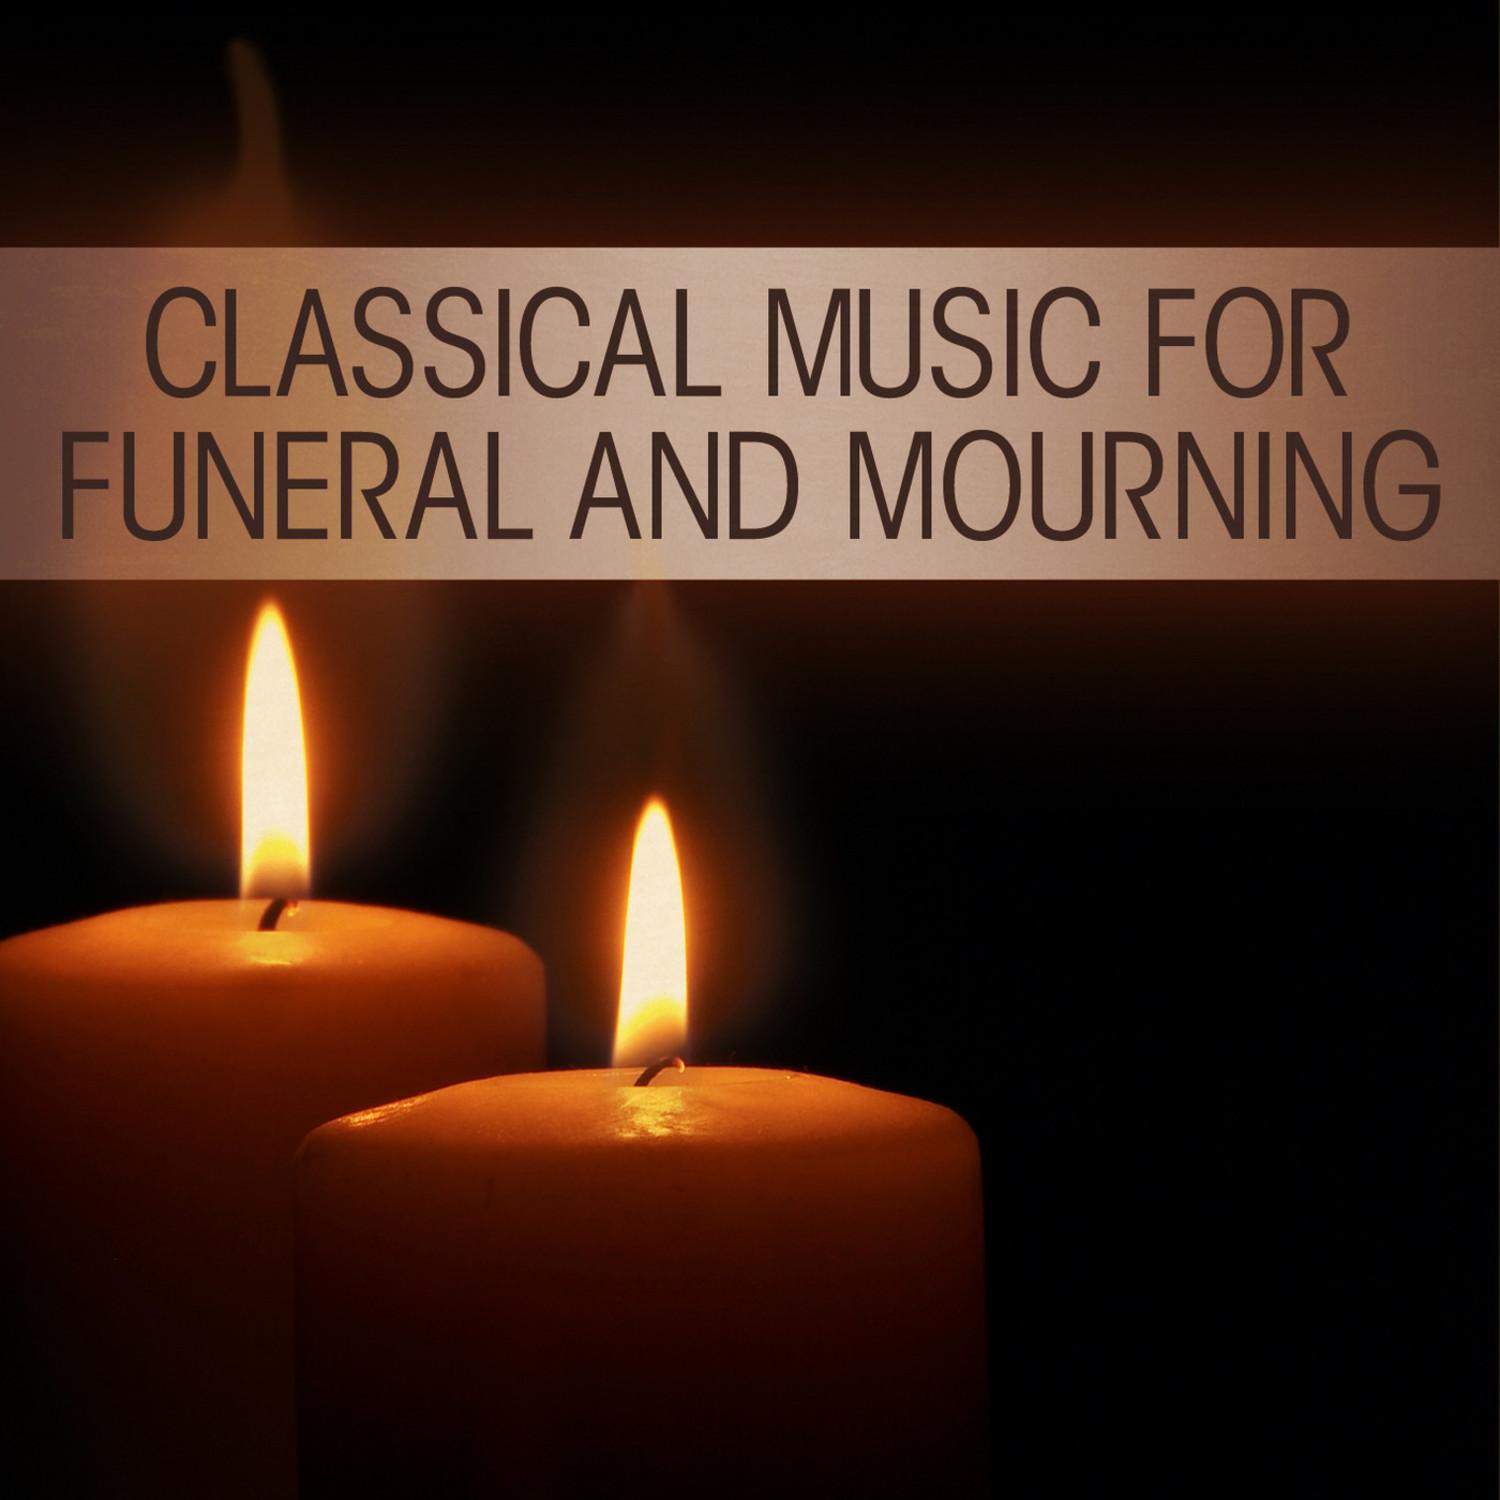 Masonic Funeral Music for Orchestra, K. 477